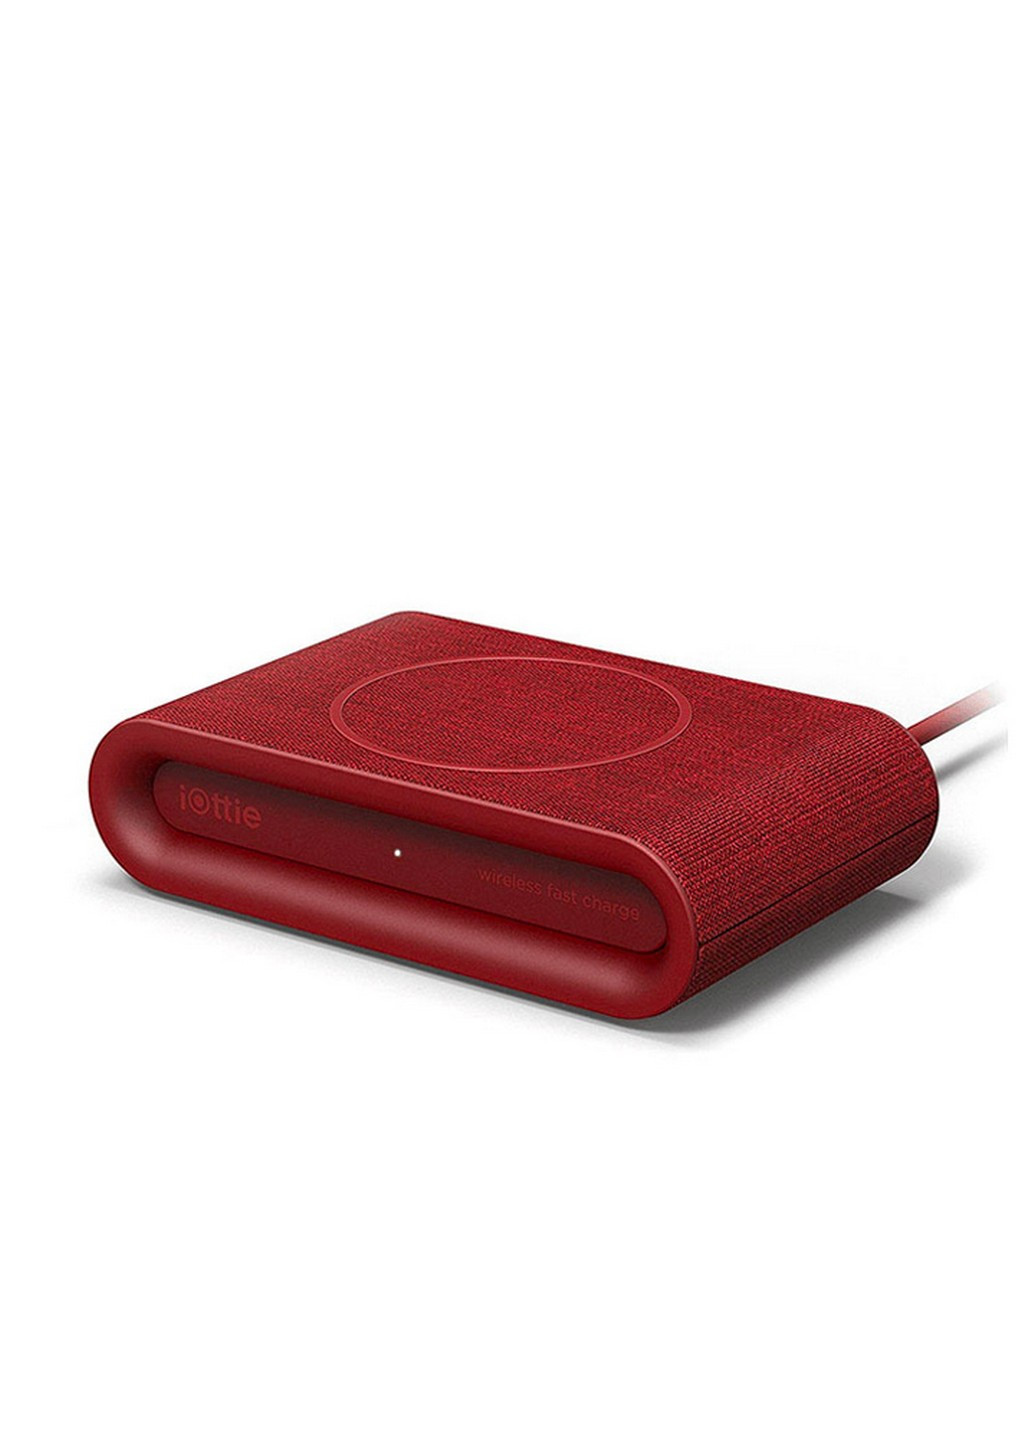 iON Wireless Plus Fast Charging Pad (Red) iOttie (196338106)